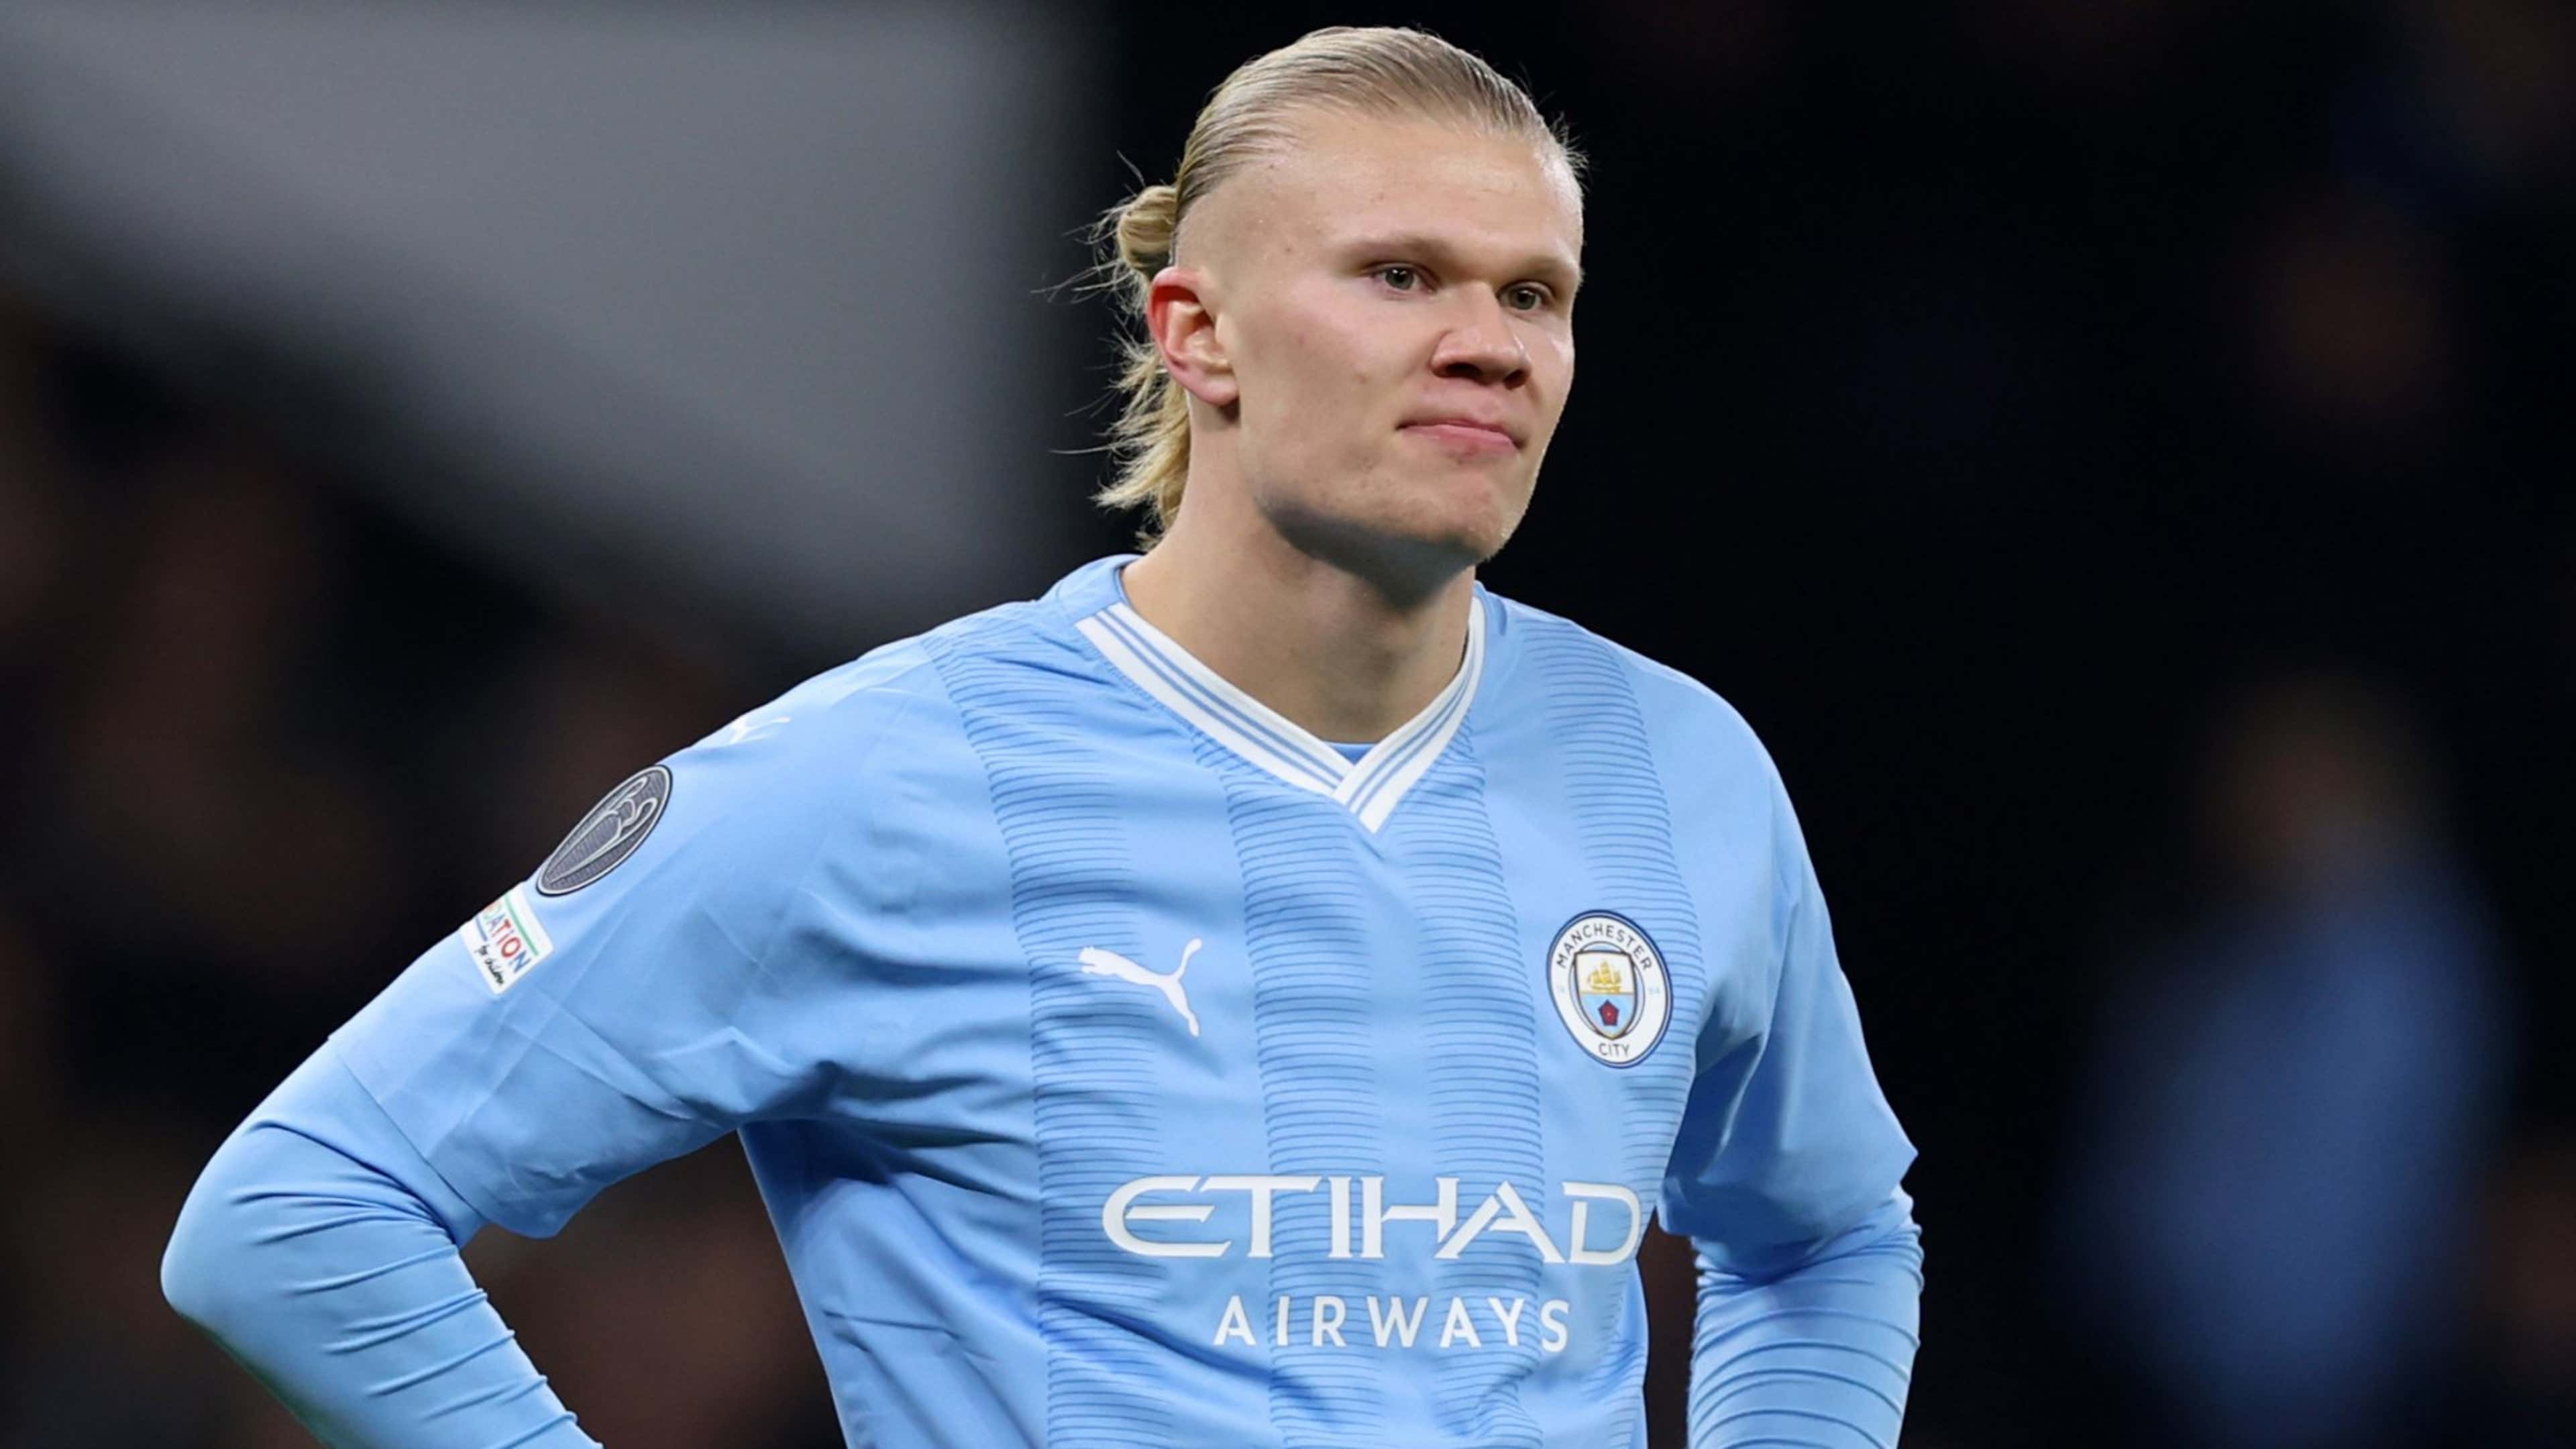 You never know' - Erling Haaland consciously fuels Real Madrid transfer  talk as he admits his 'focus' is not on potential contract extension at Man  City | Goal.com